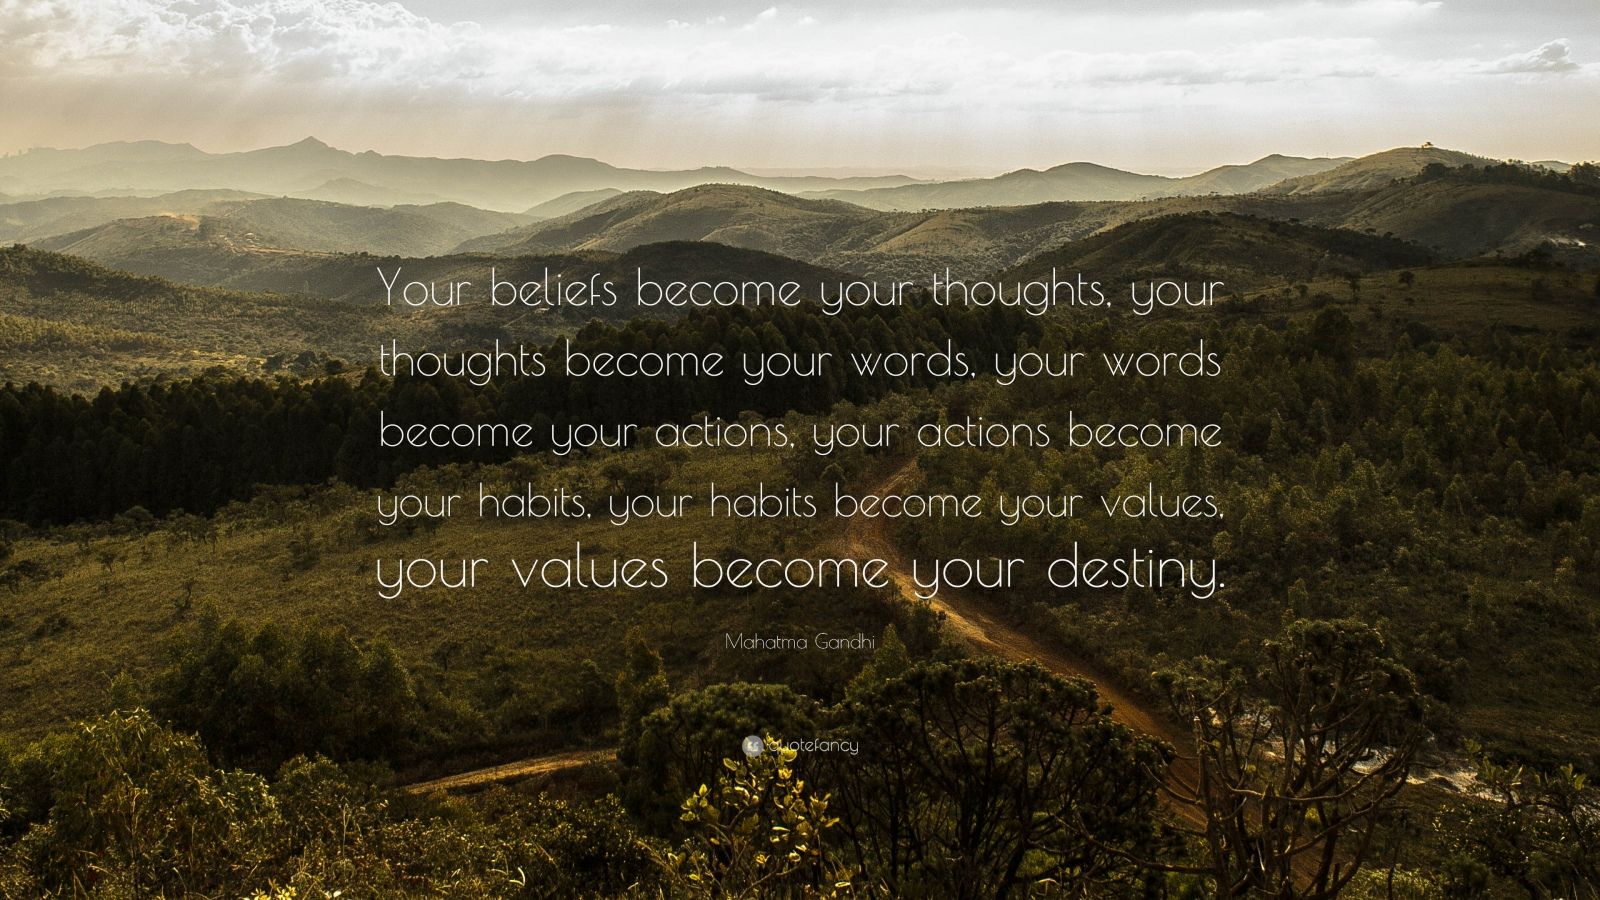 Mahatma Gandhi Quote: “Your beliefs become your thoughts, your thoughts